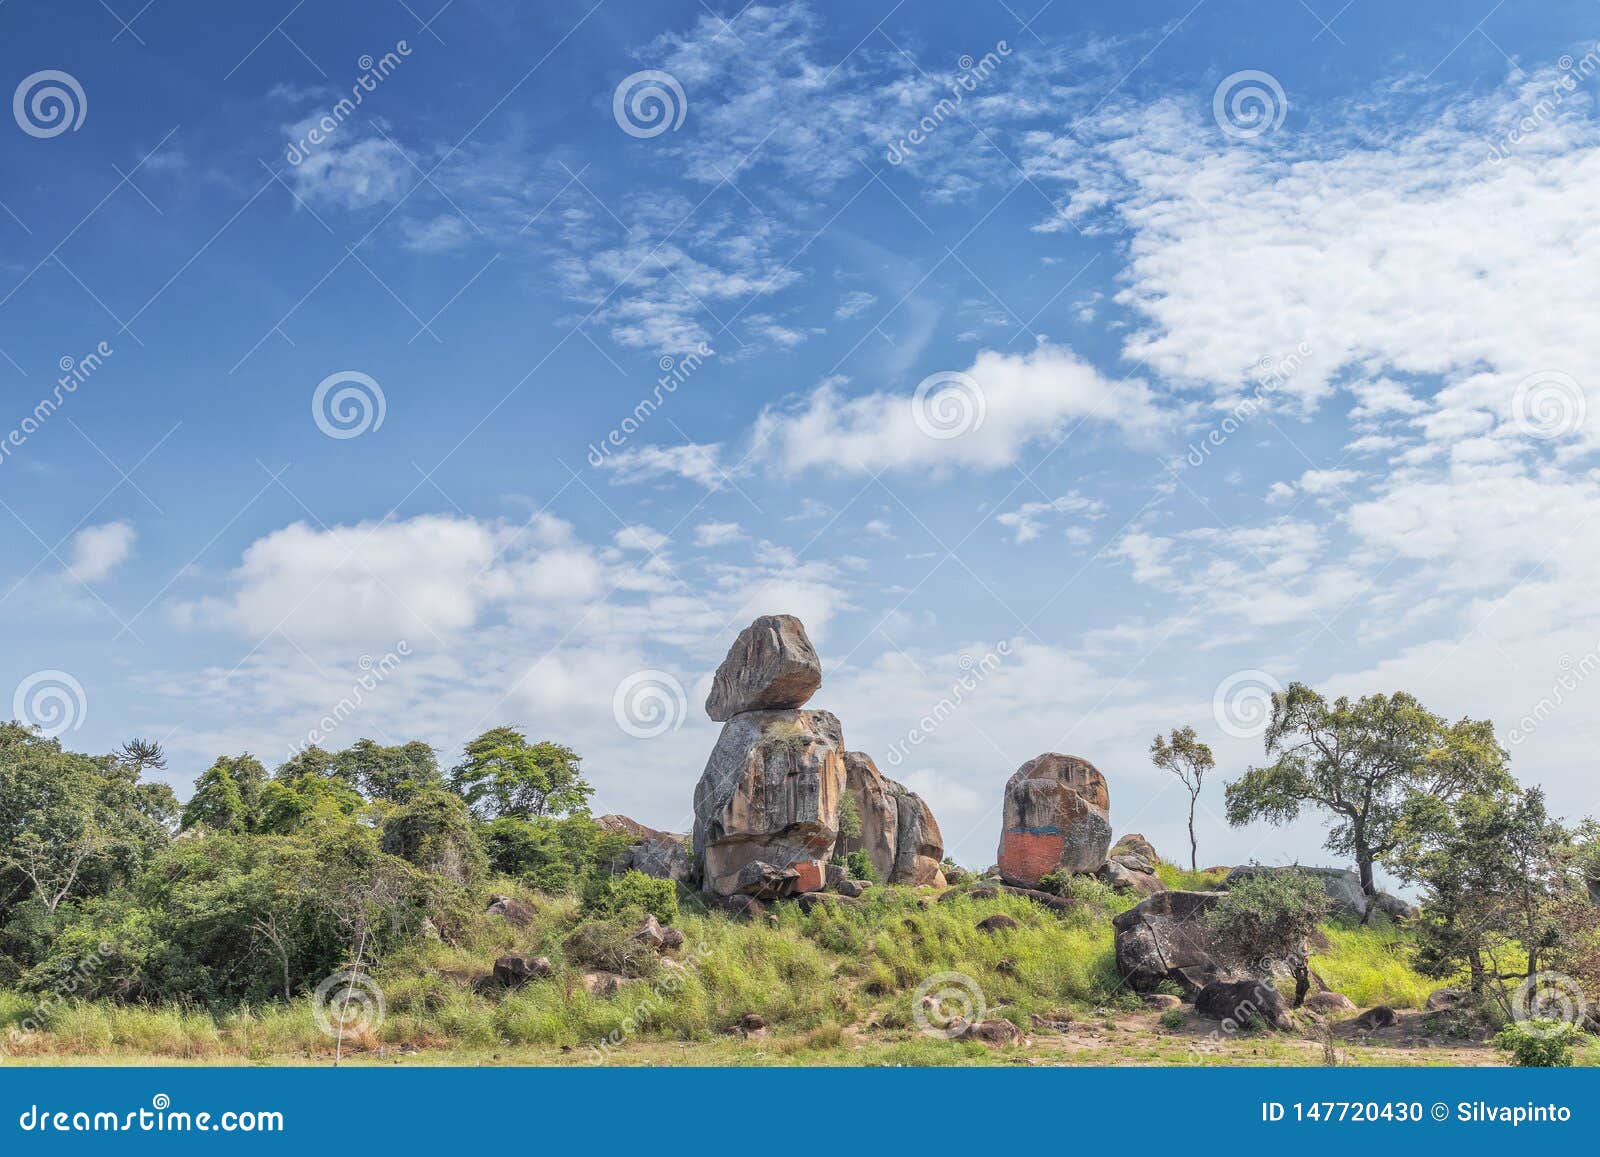 solitary stones inserted in the african vegetation on the way to northern angola. soyo. africa